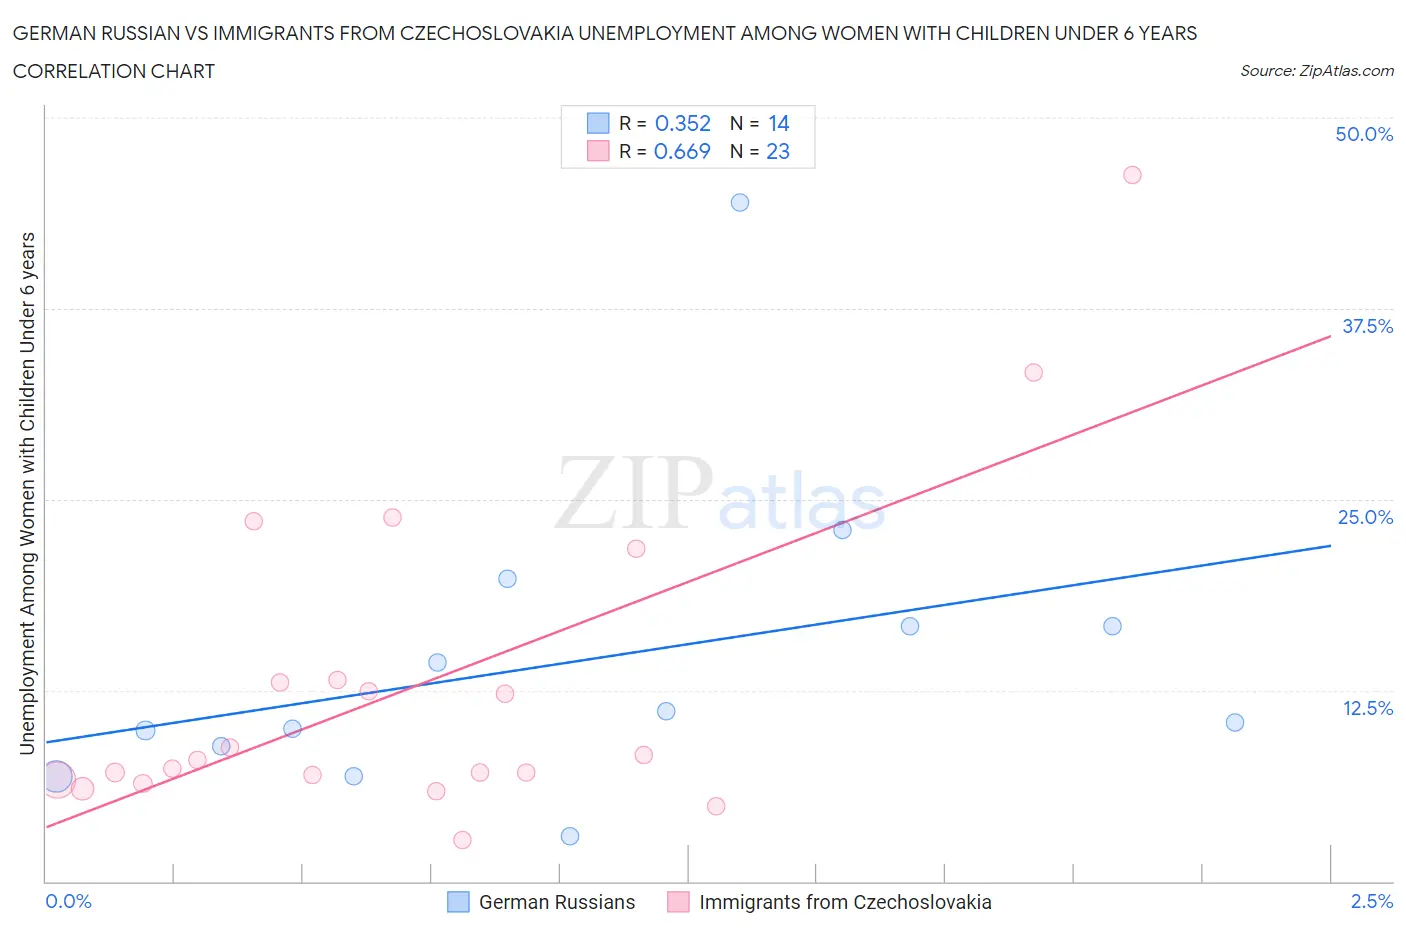 German Russian vs Immigrants from Czechoslovakia Unemployment Among Women with Children Under 6 years